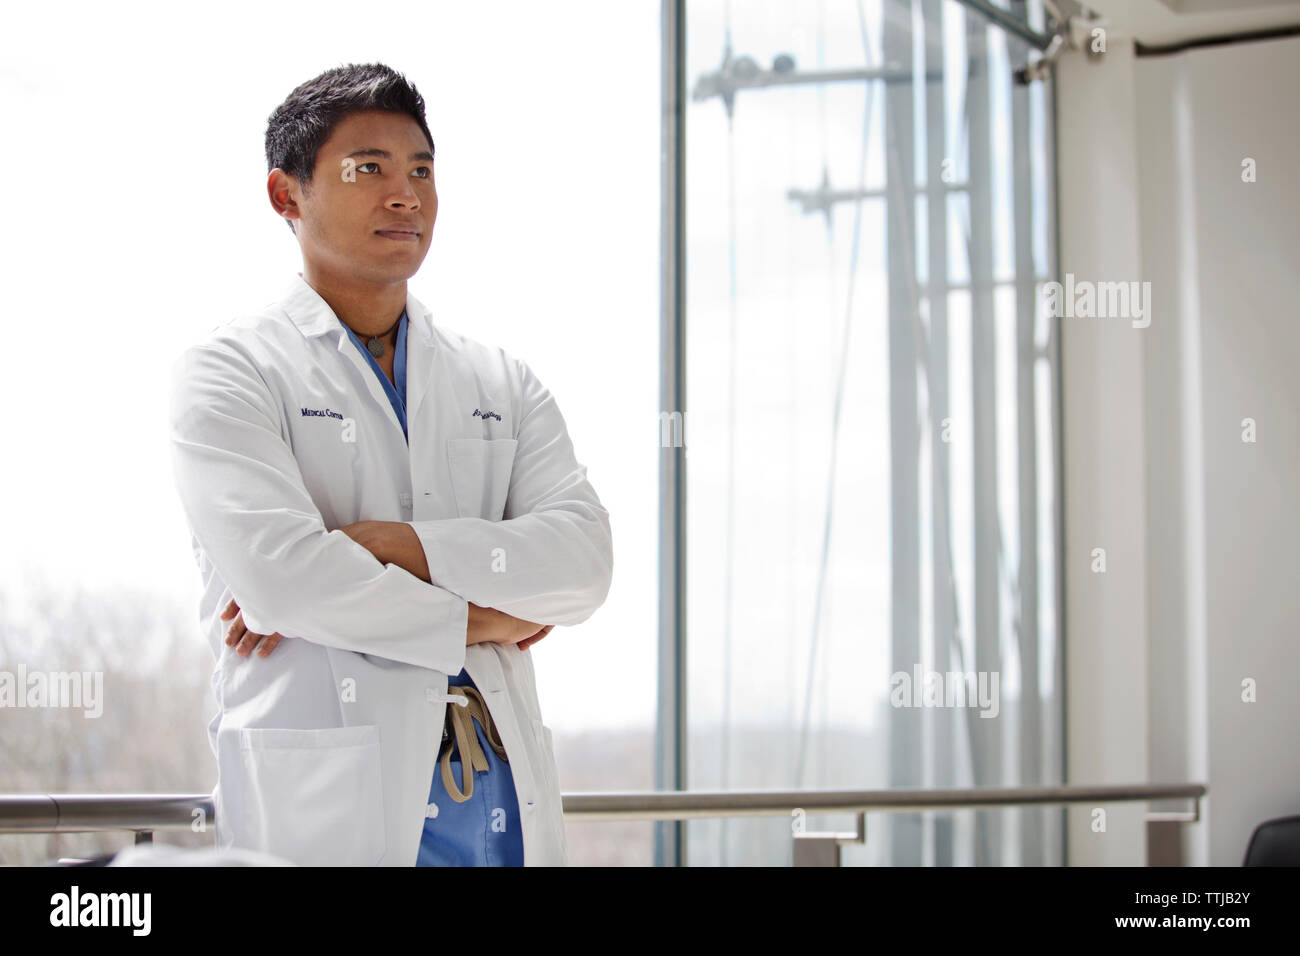 Man with arms crossed standing against window in hospital Stock Photo